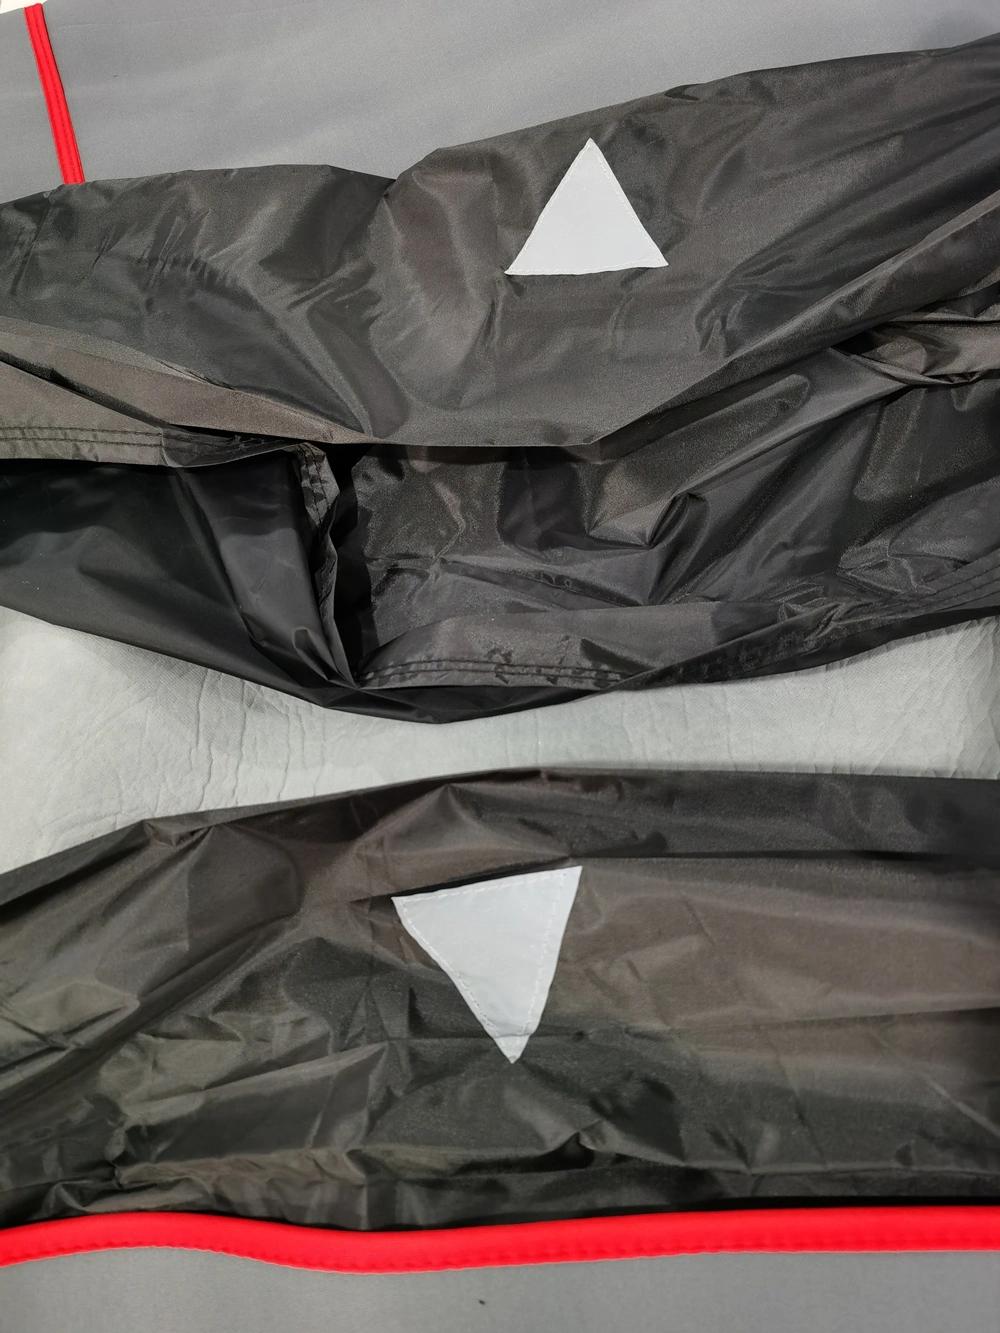 Car Covers Hail Protection 5mm EVA Padded with Non-Woven